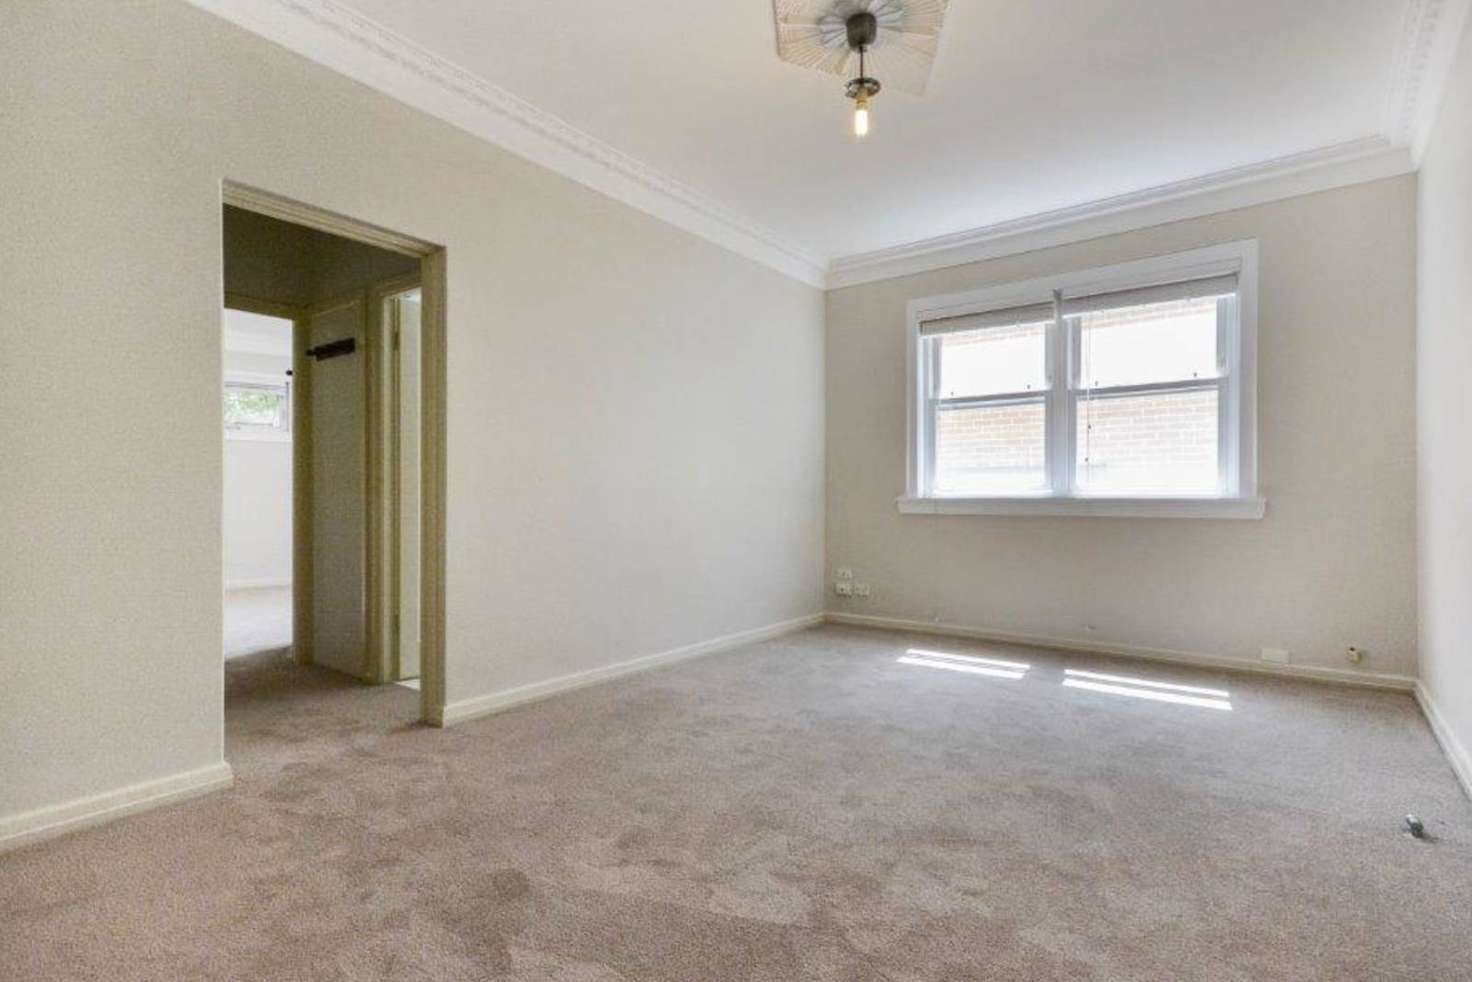 Main view of Homely apartment listing, 7/222 Old South Head Rd, Bondi NSW 2026